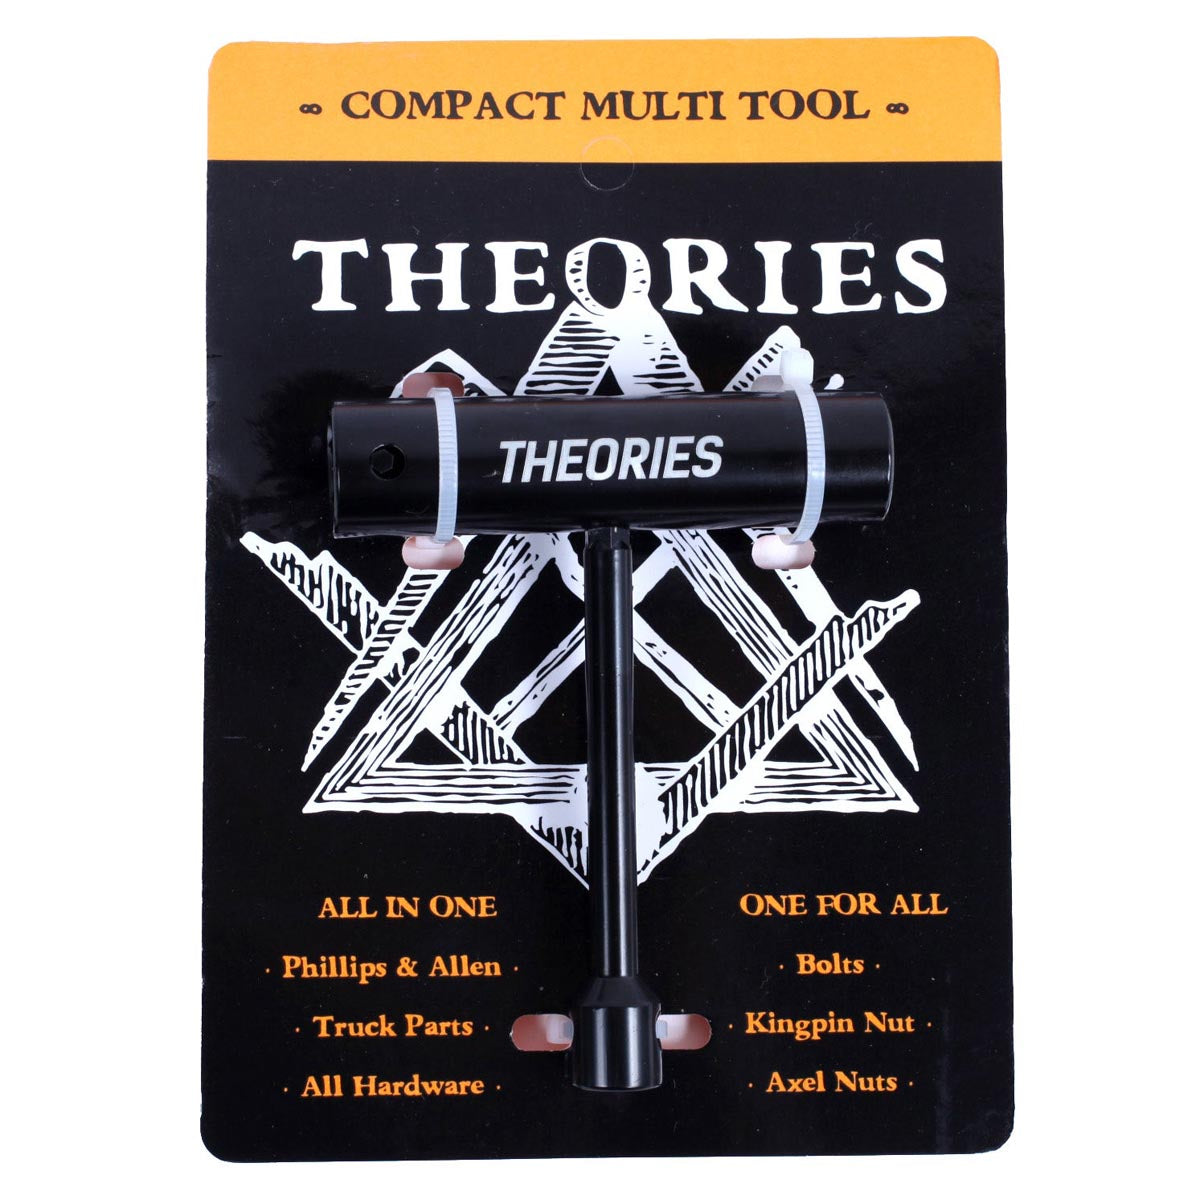 Theories Multi Compact Tool image 1